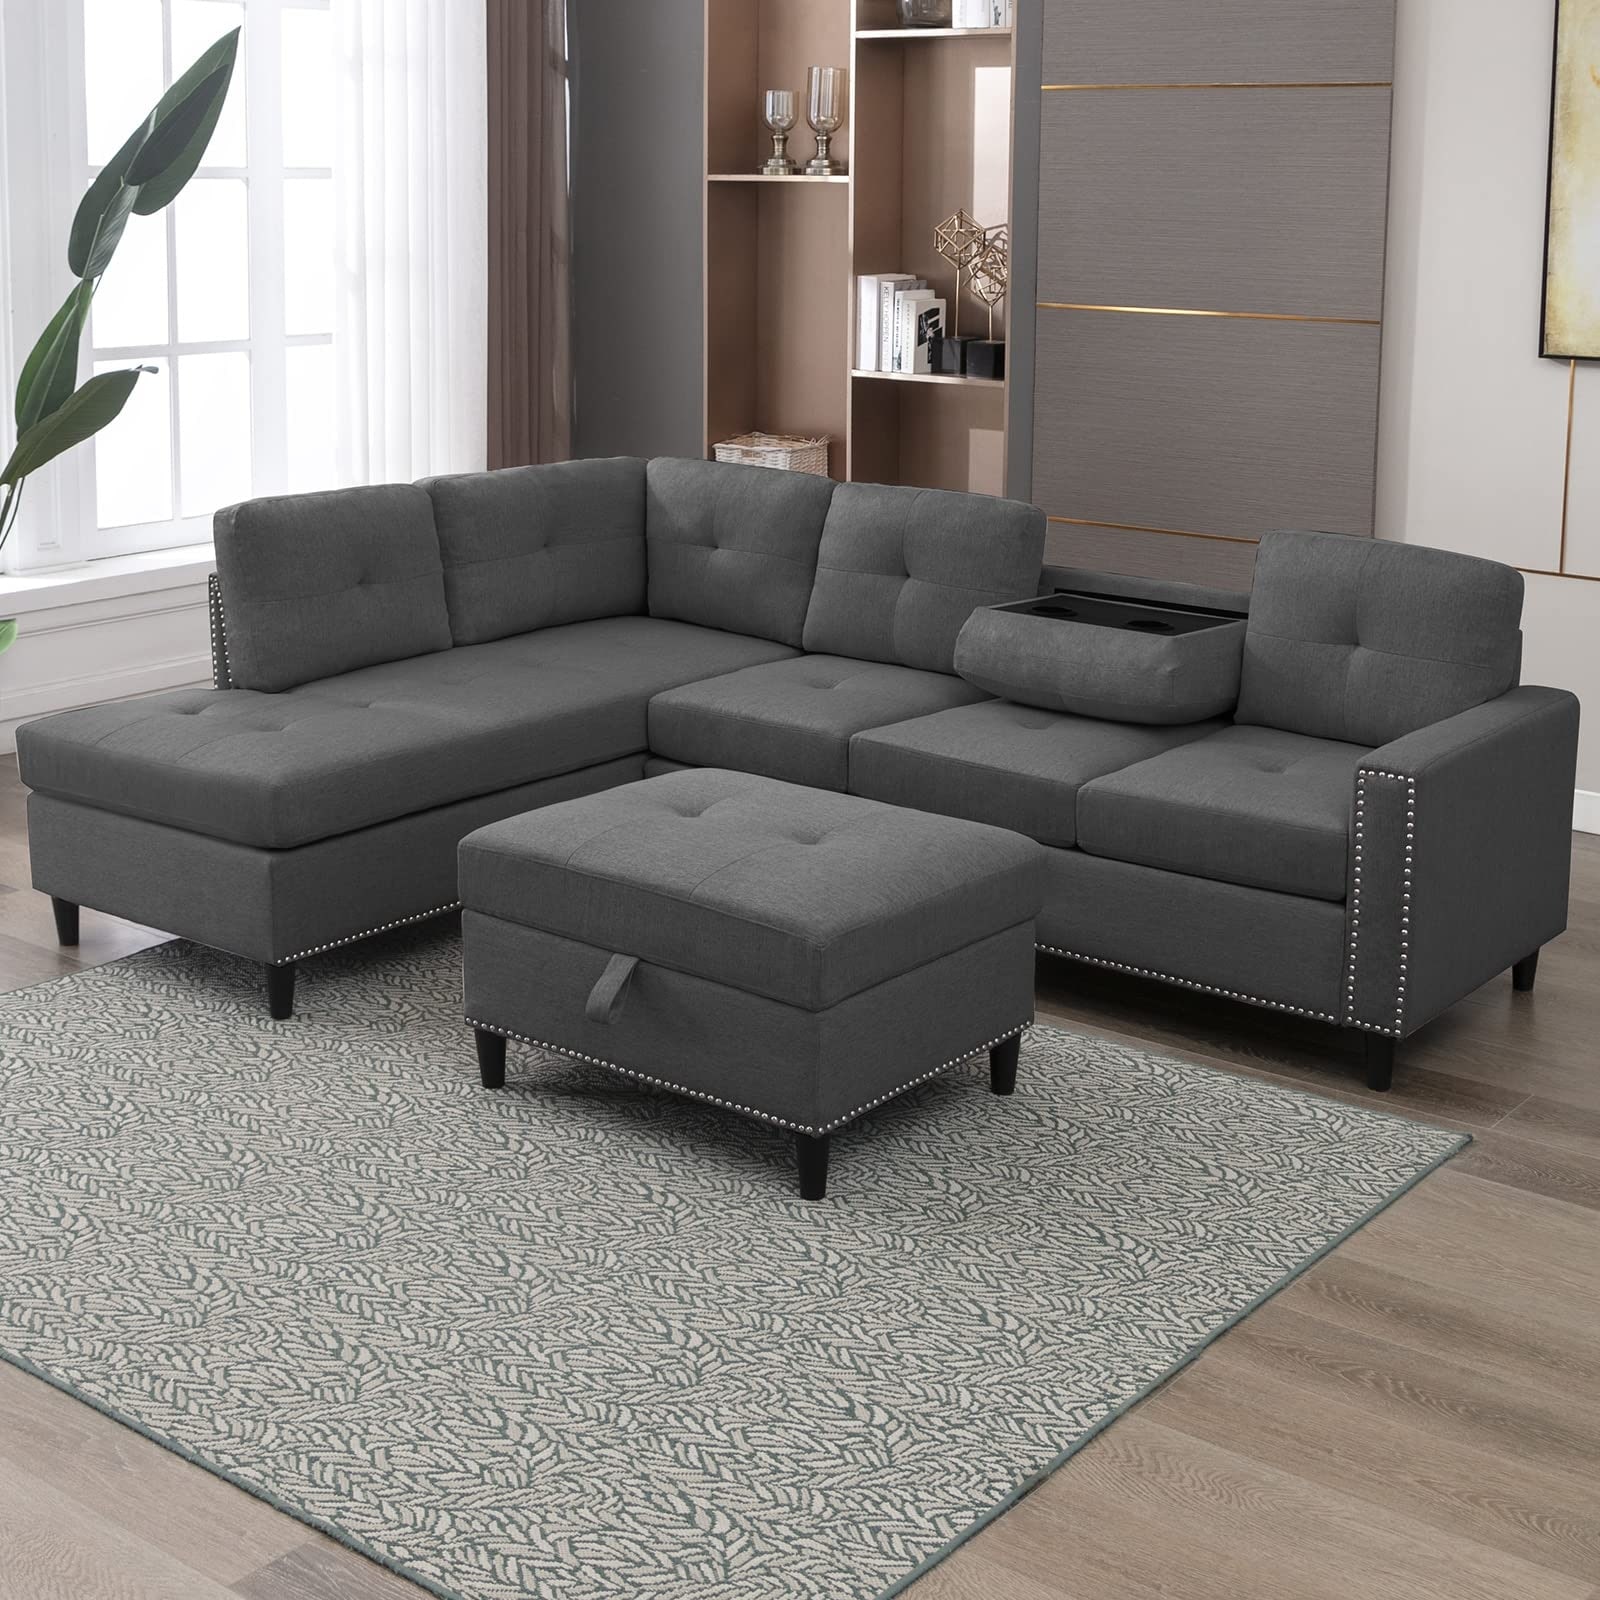 Modern Linen Upholstered Sofa - Storageable Coffee Table, 2 Cupholders, and 2 USB Ports - Beige